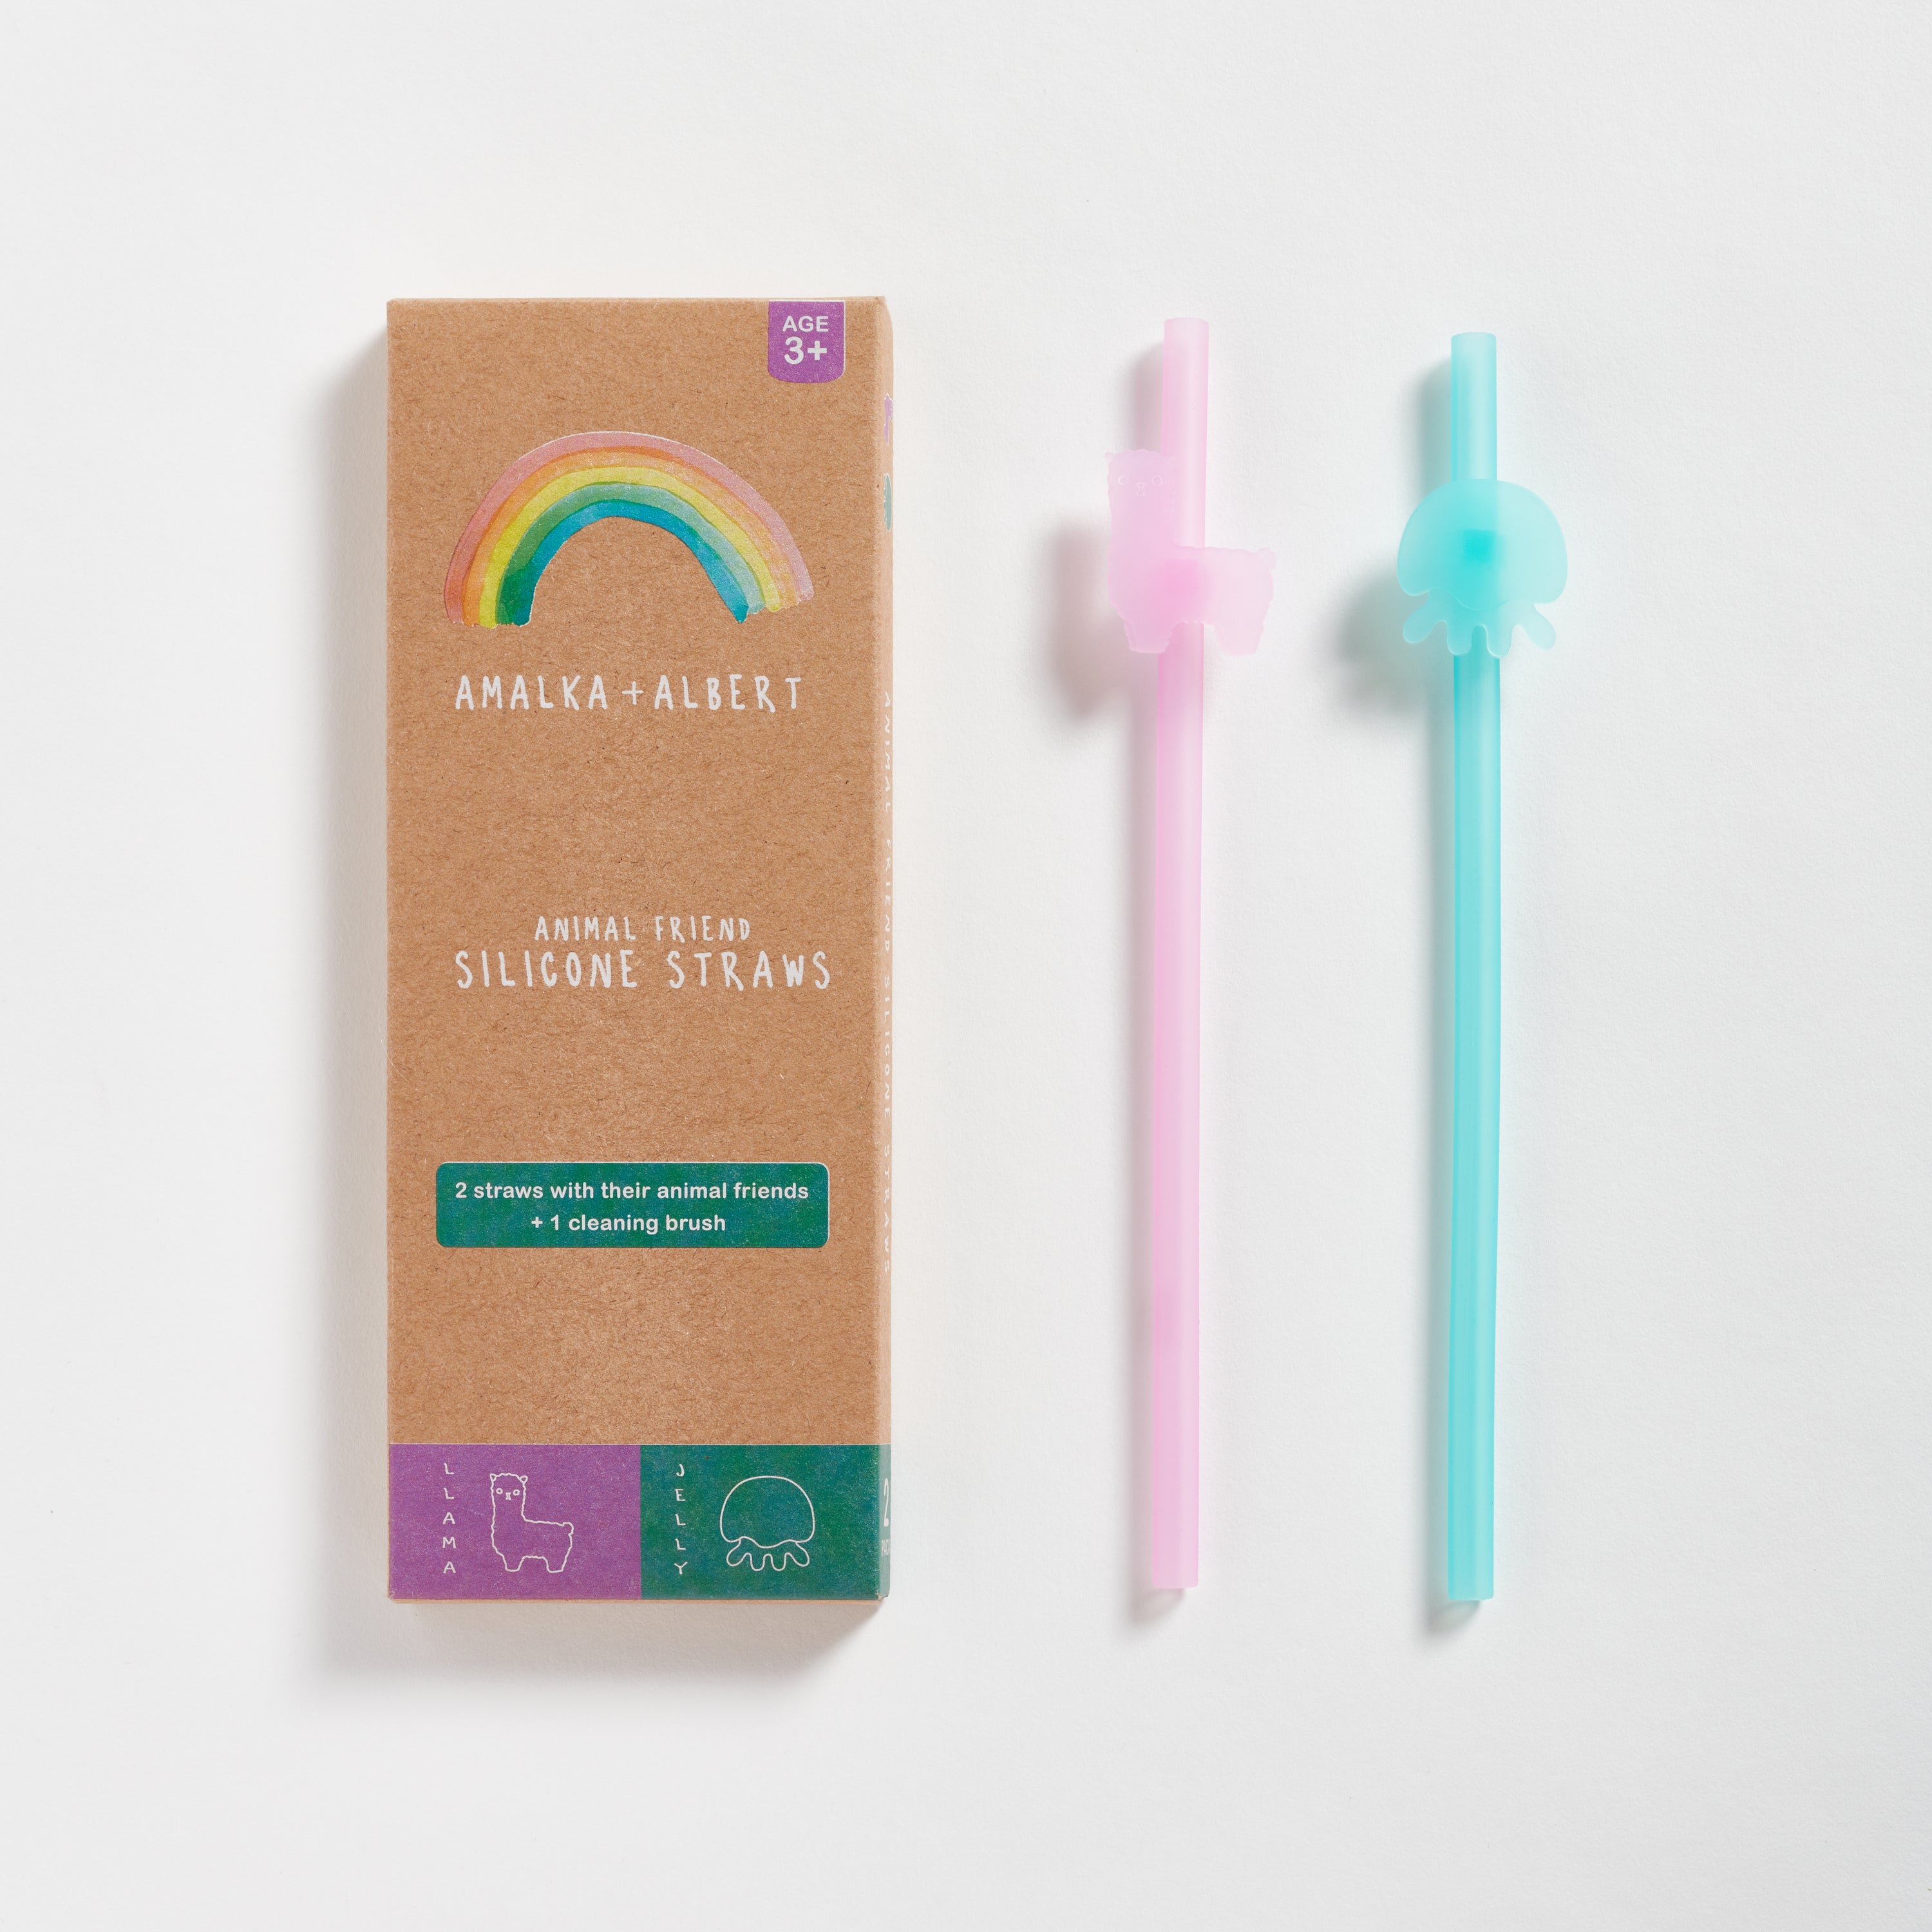 Animal Friend Straws - Jelly and Llama 2 Pack